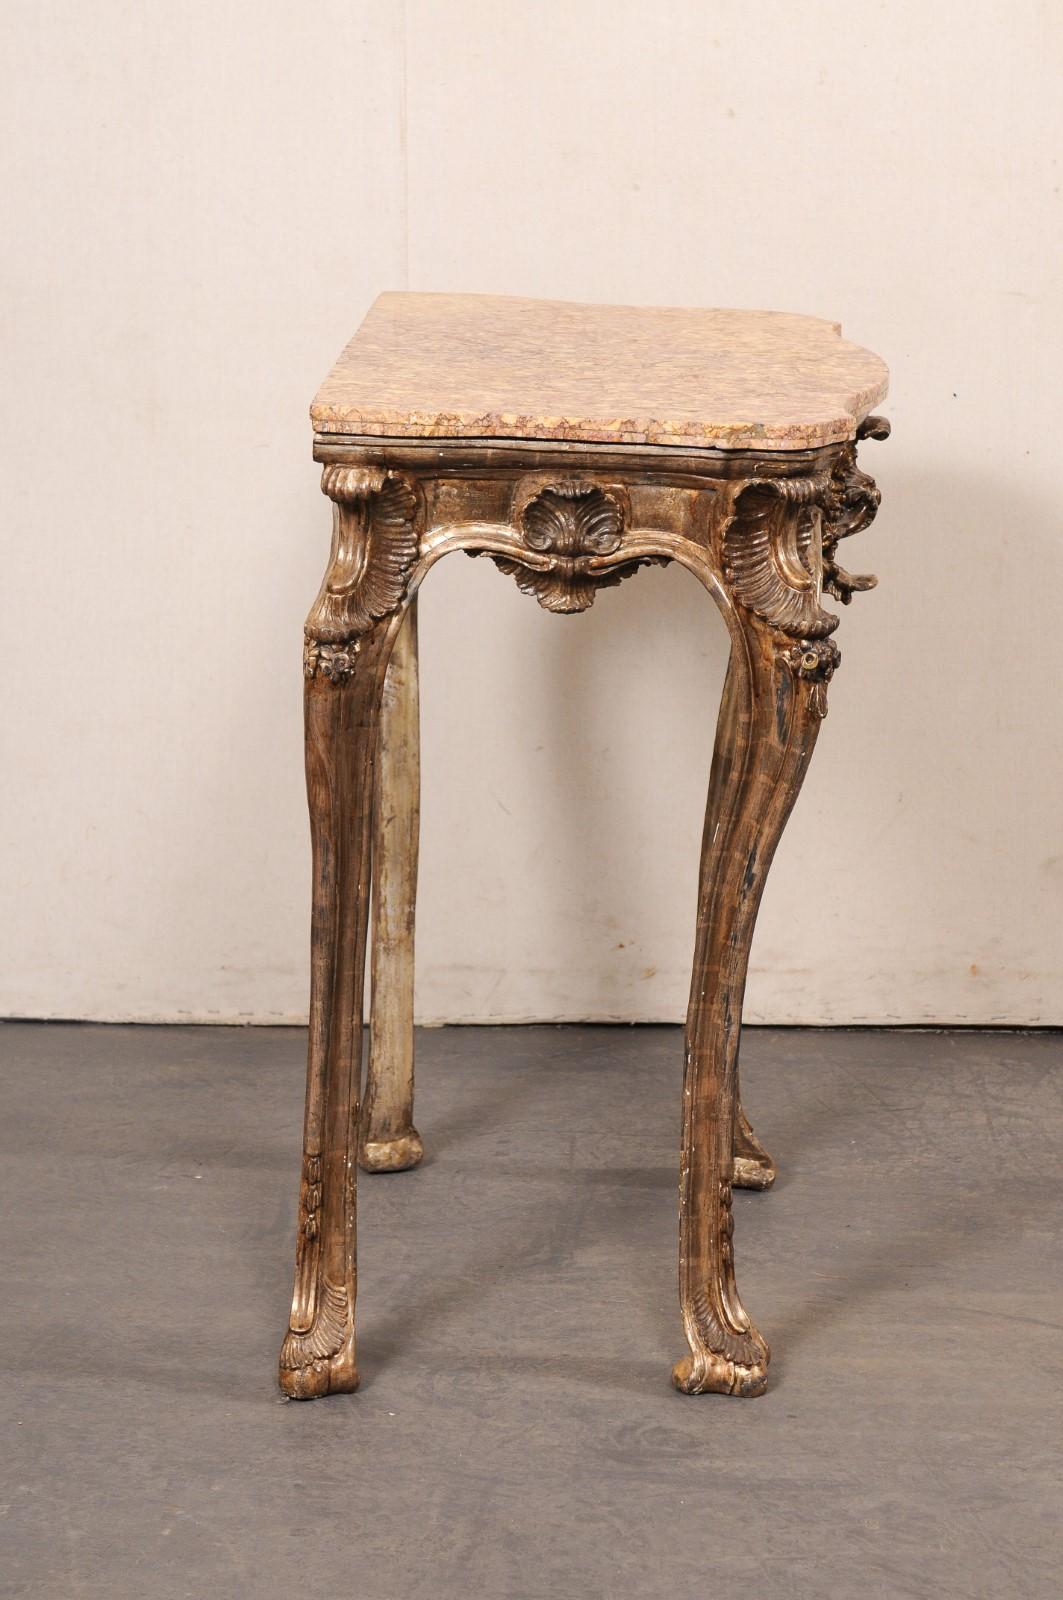 Wood Italian Period Rococo Ornate Accent Table w/its Original Finish & Marble Top For Sale